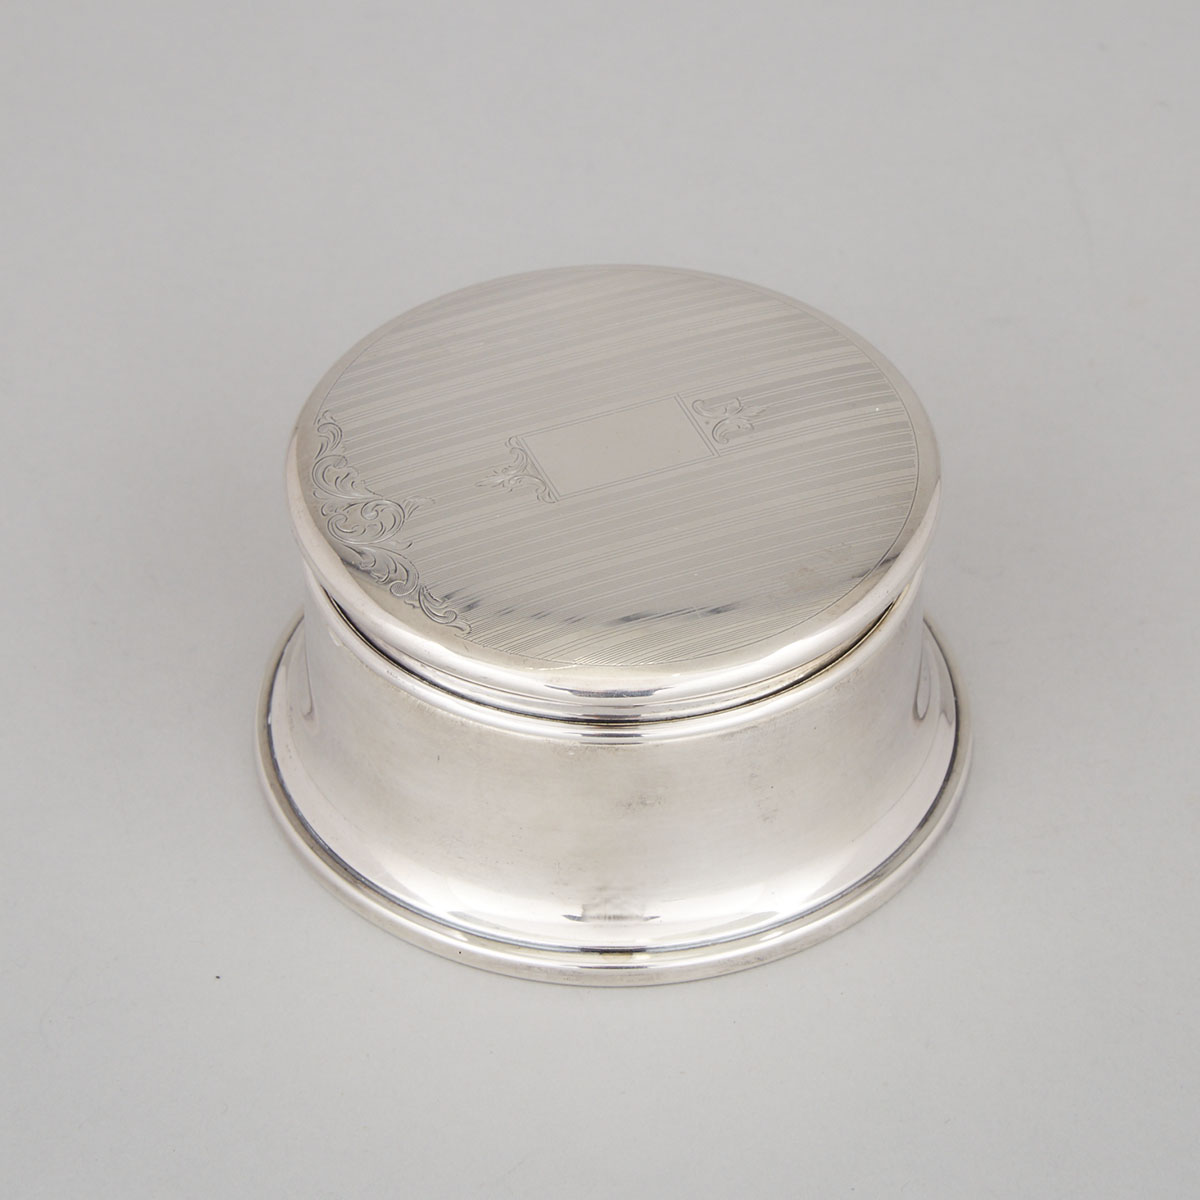 Canadian Silver Jewellery Box, Henry Birks & Son, Montreal, Que., c.1904-24